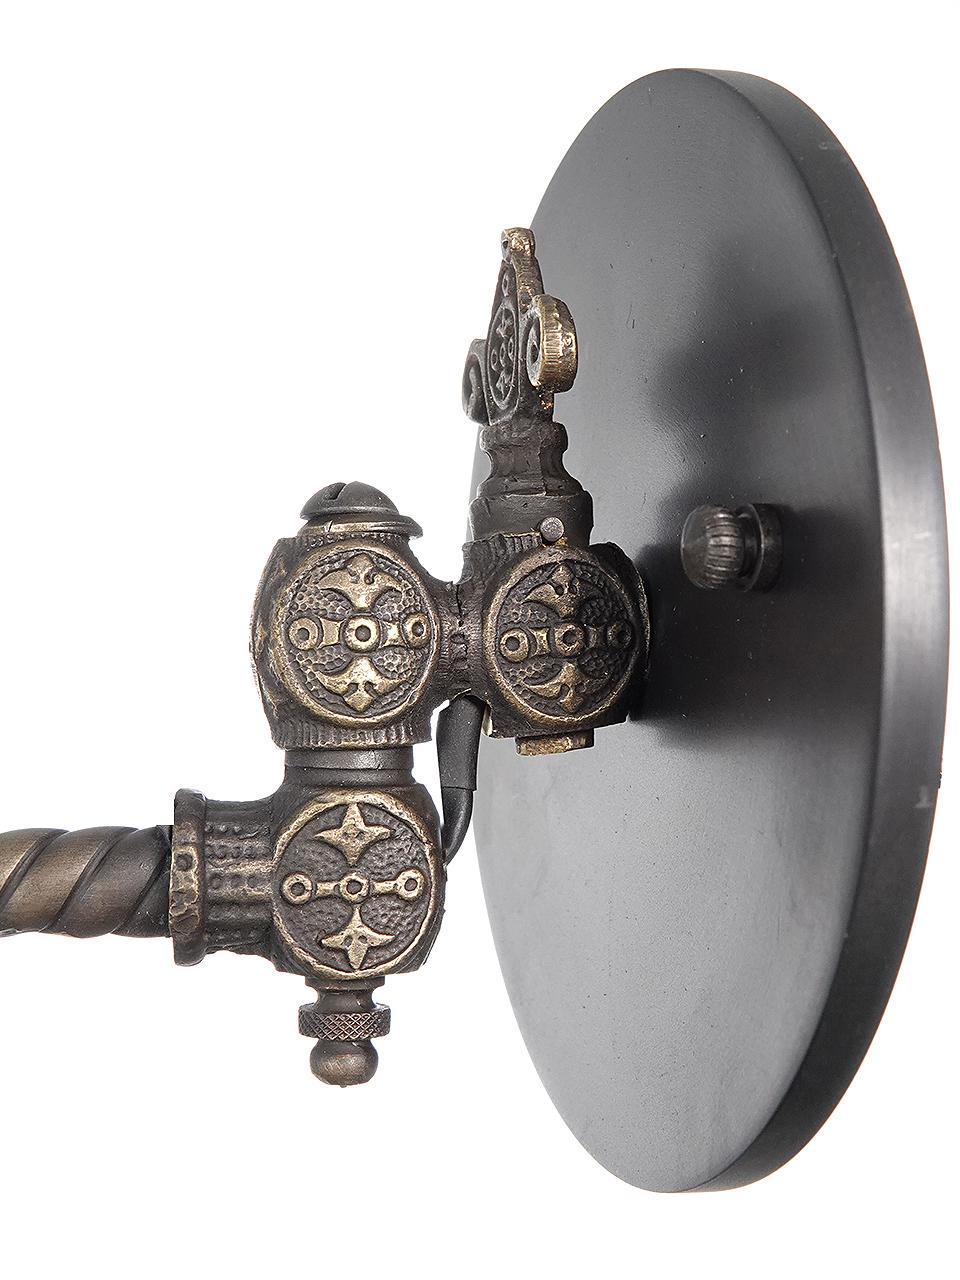 This is a nice delicate double arm gas articulating wall sconce. The brass castings have lots of ornate Victorian detail and it ends with a beautiful pleated milk glass shade. It is wired to now take a standard E12 bulb. One in stock.